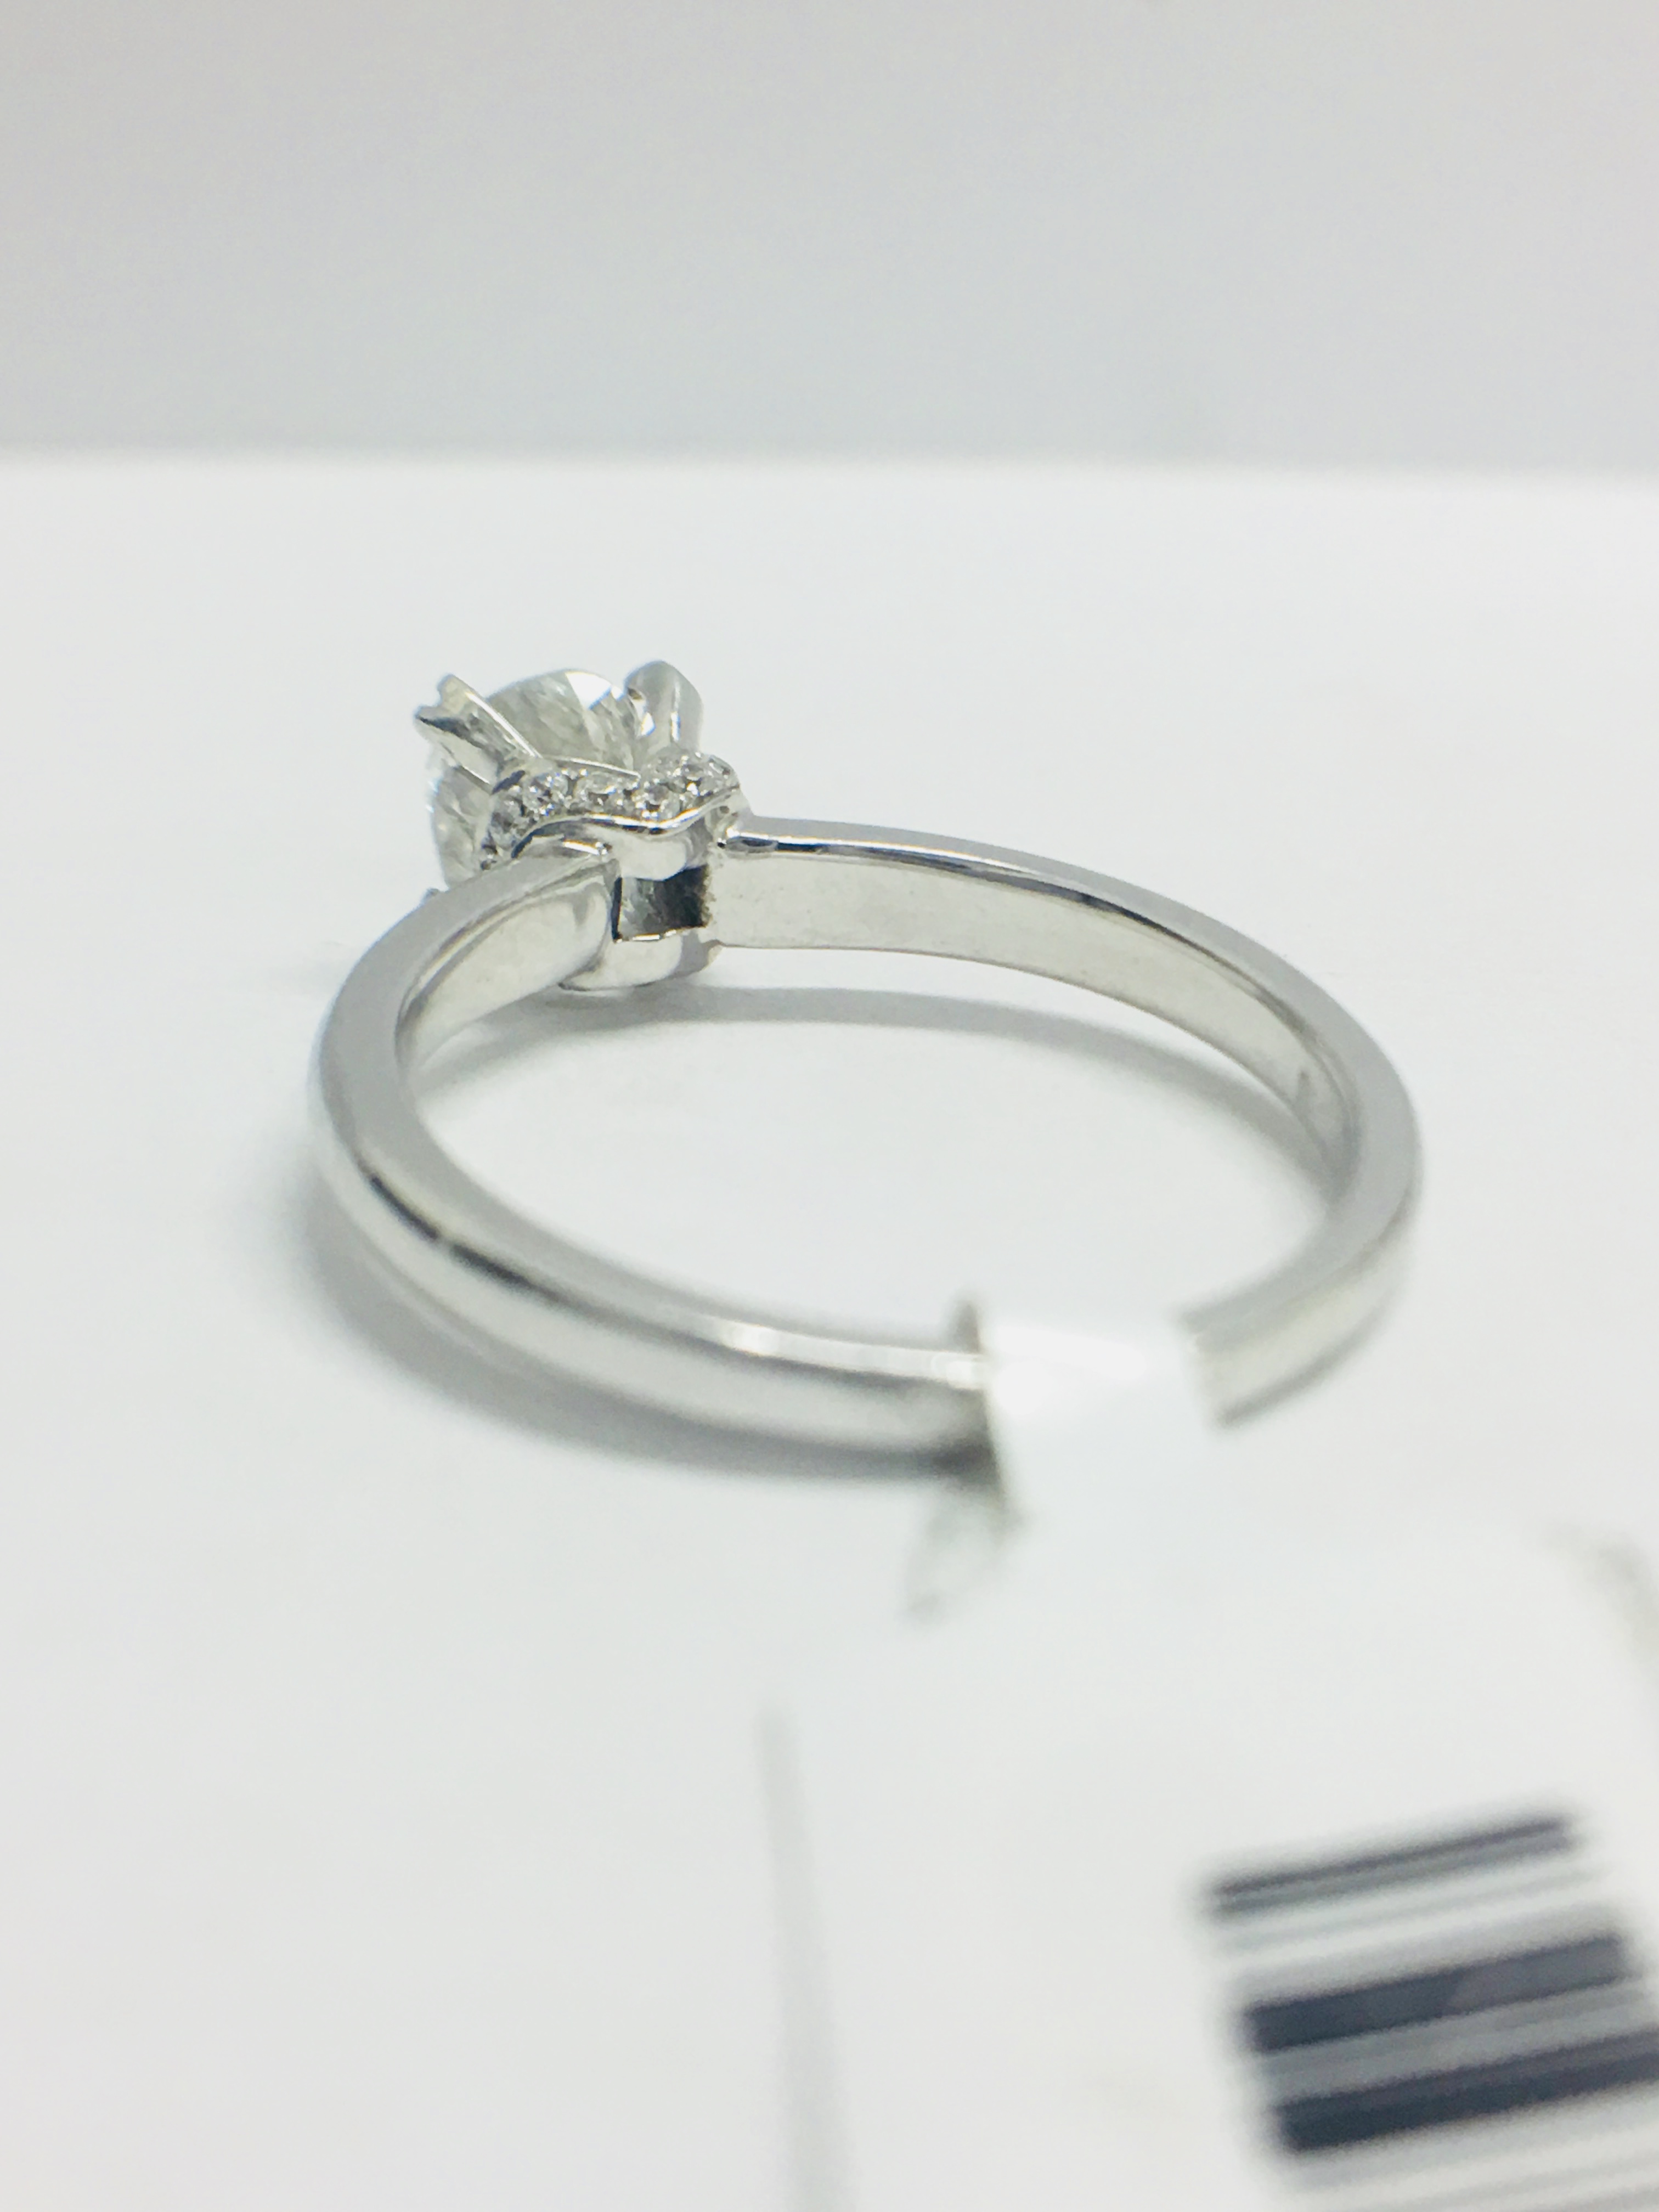 1Ct Cushion Cut Diamond Solitaire Ring In A Diamond Set Mount, - Image 8 of 11